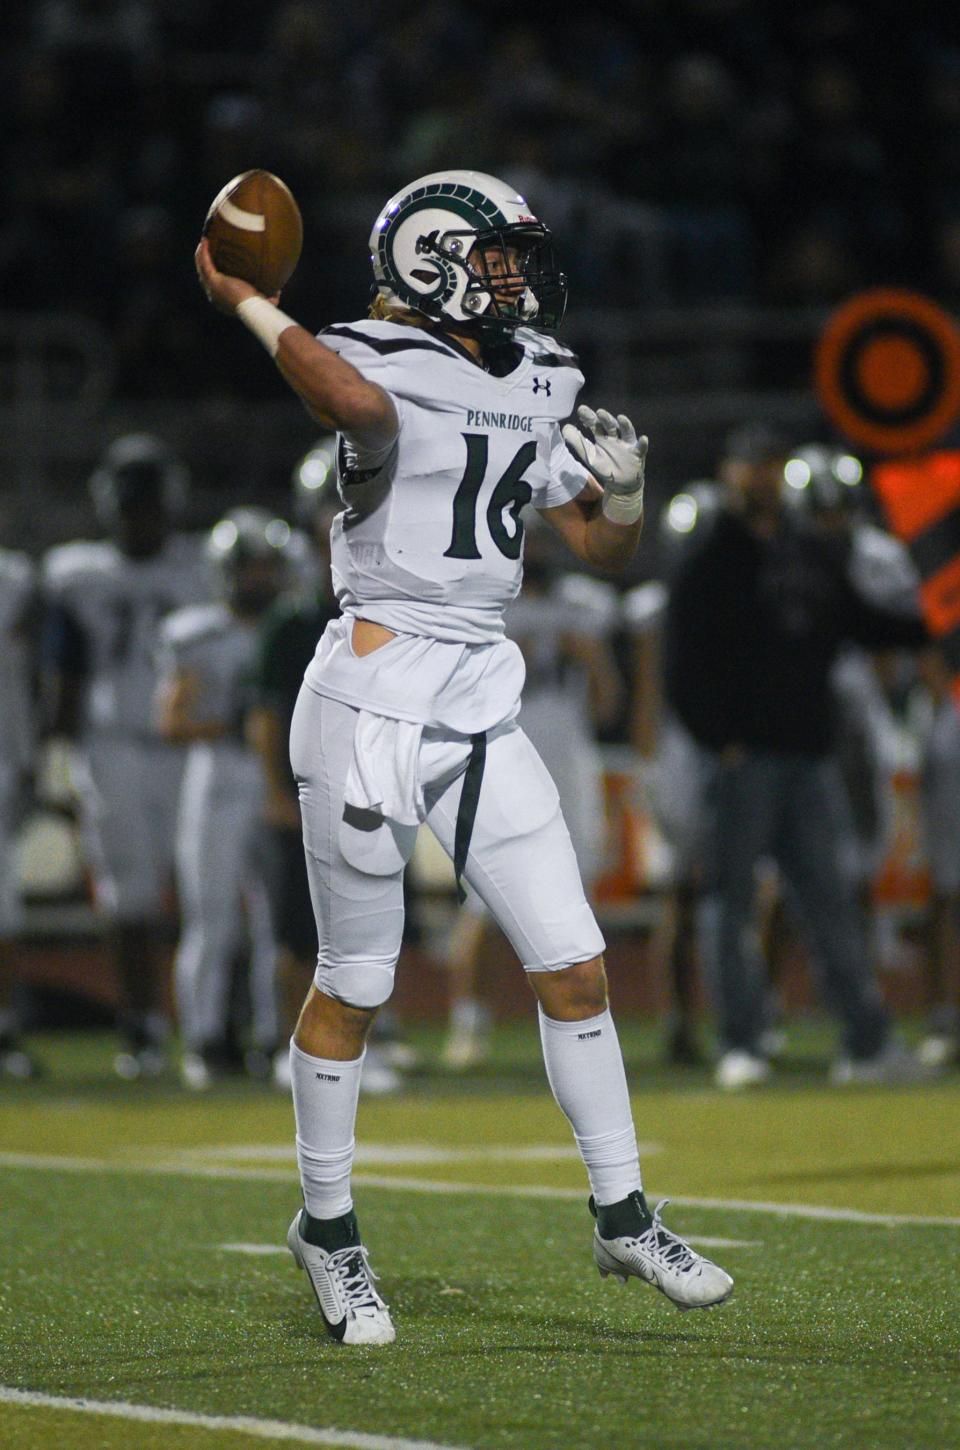 Pennridge's Noah Keating has been the Rams' starting quarterback for the past two seasons.